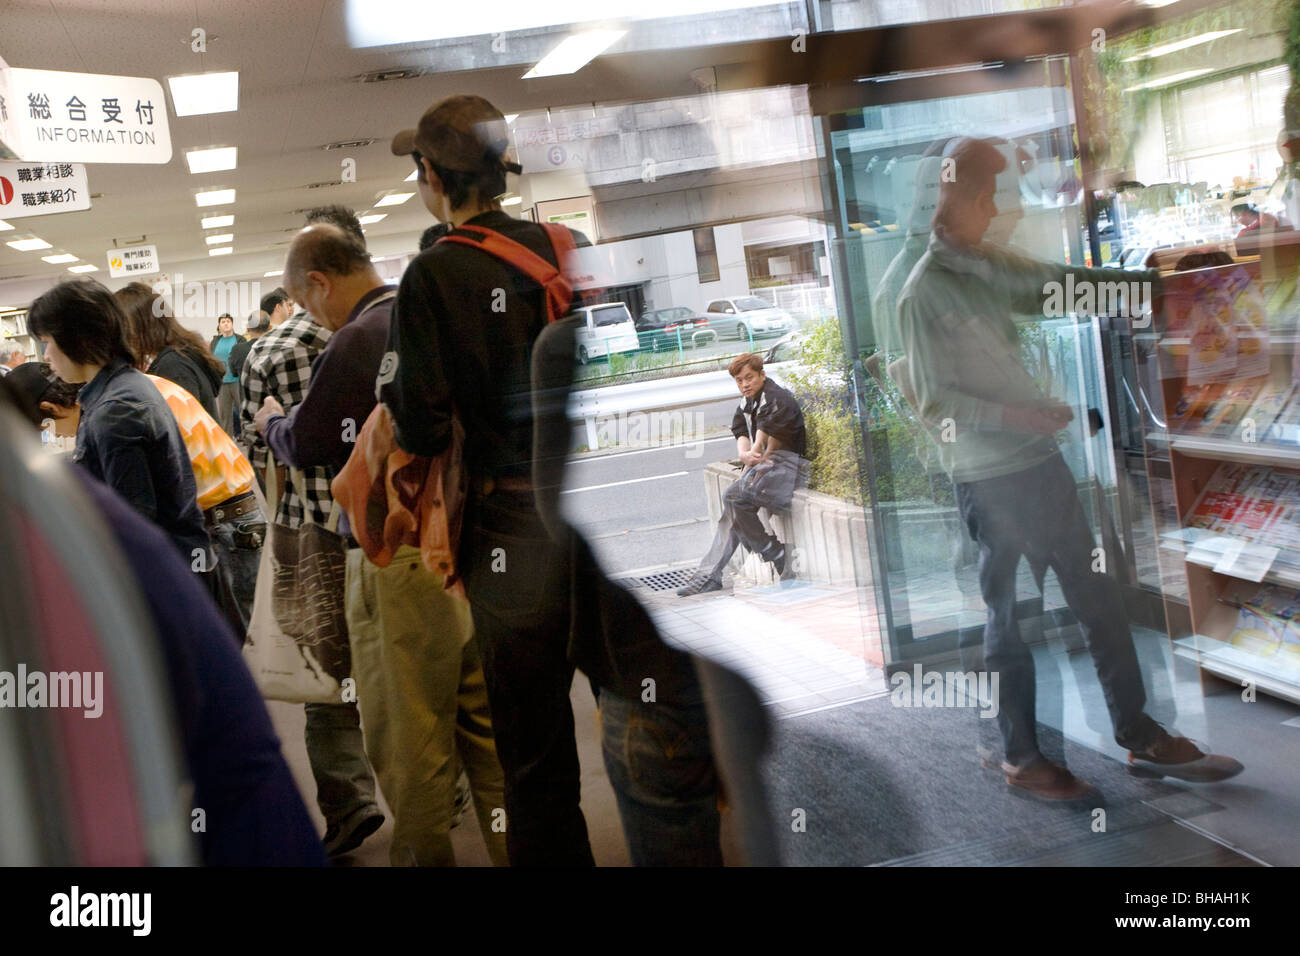 Job seekers, many from South American countries, apply for jobs and unemployment benefits in Toyota city, Japan Stock Photo